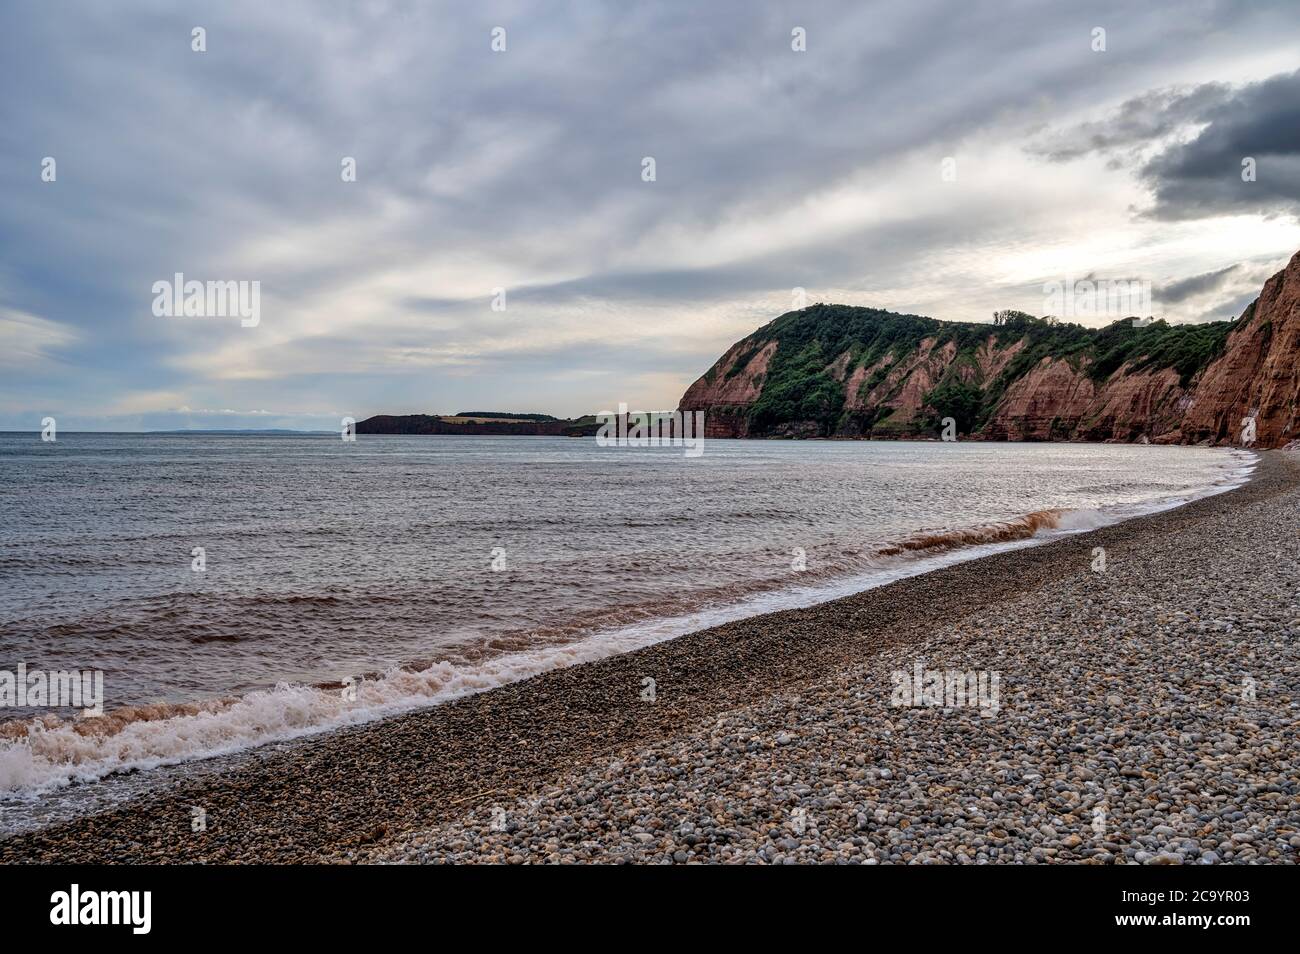 View towards High Peak from Sidmouth in Devon in England Stock Photo